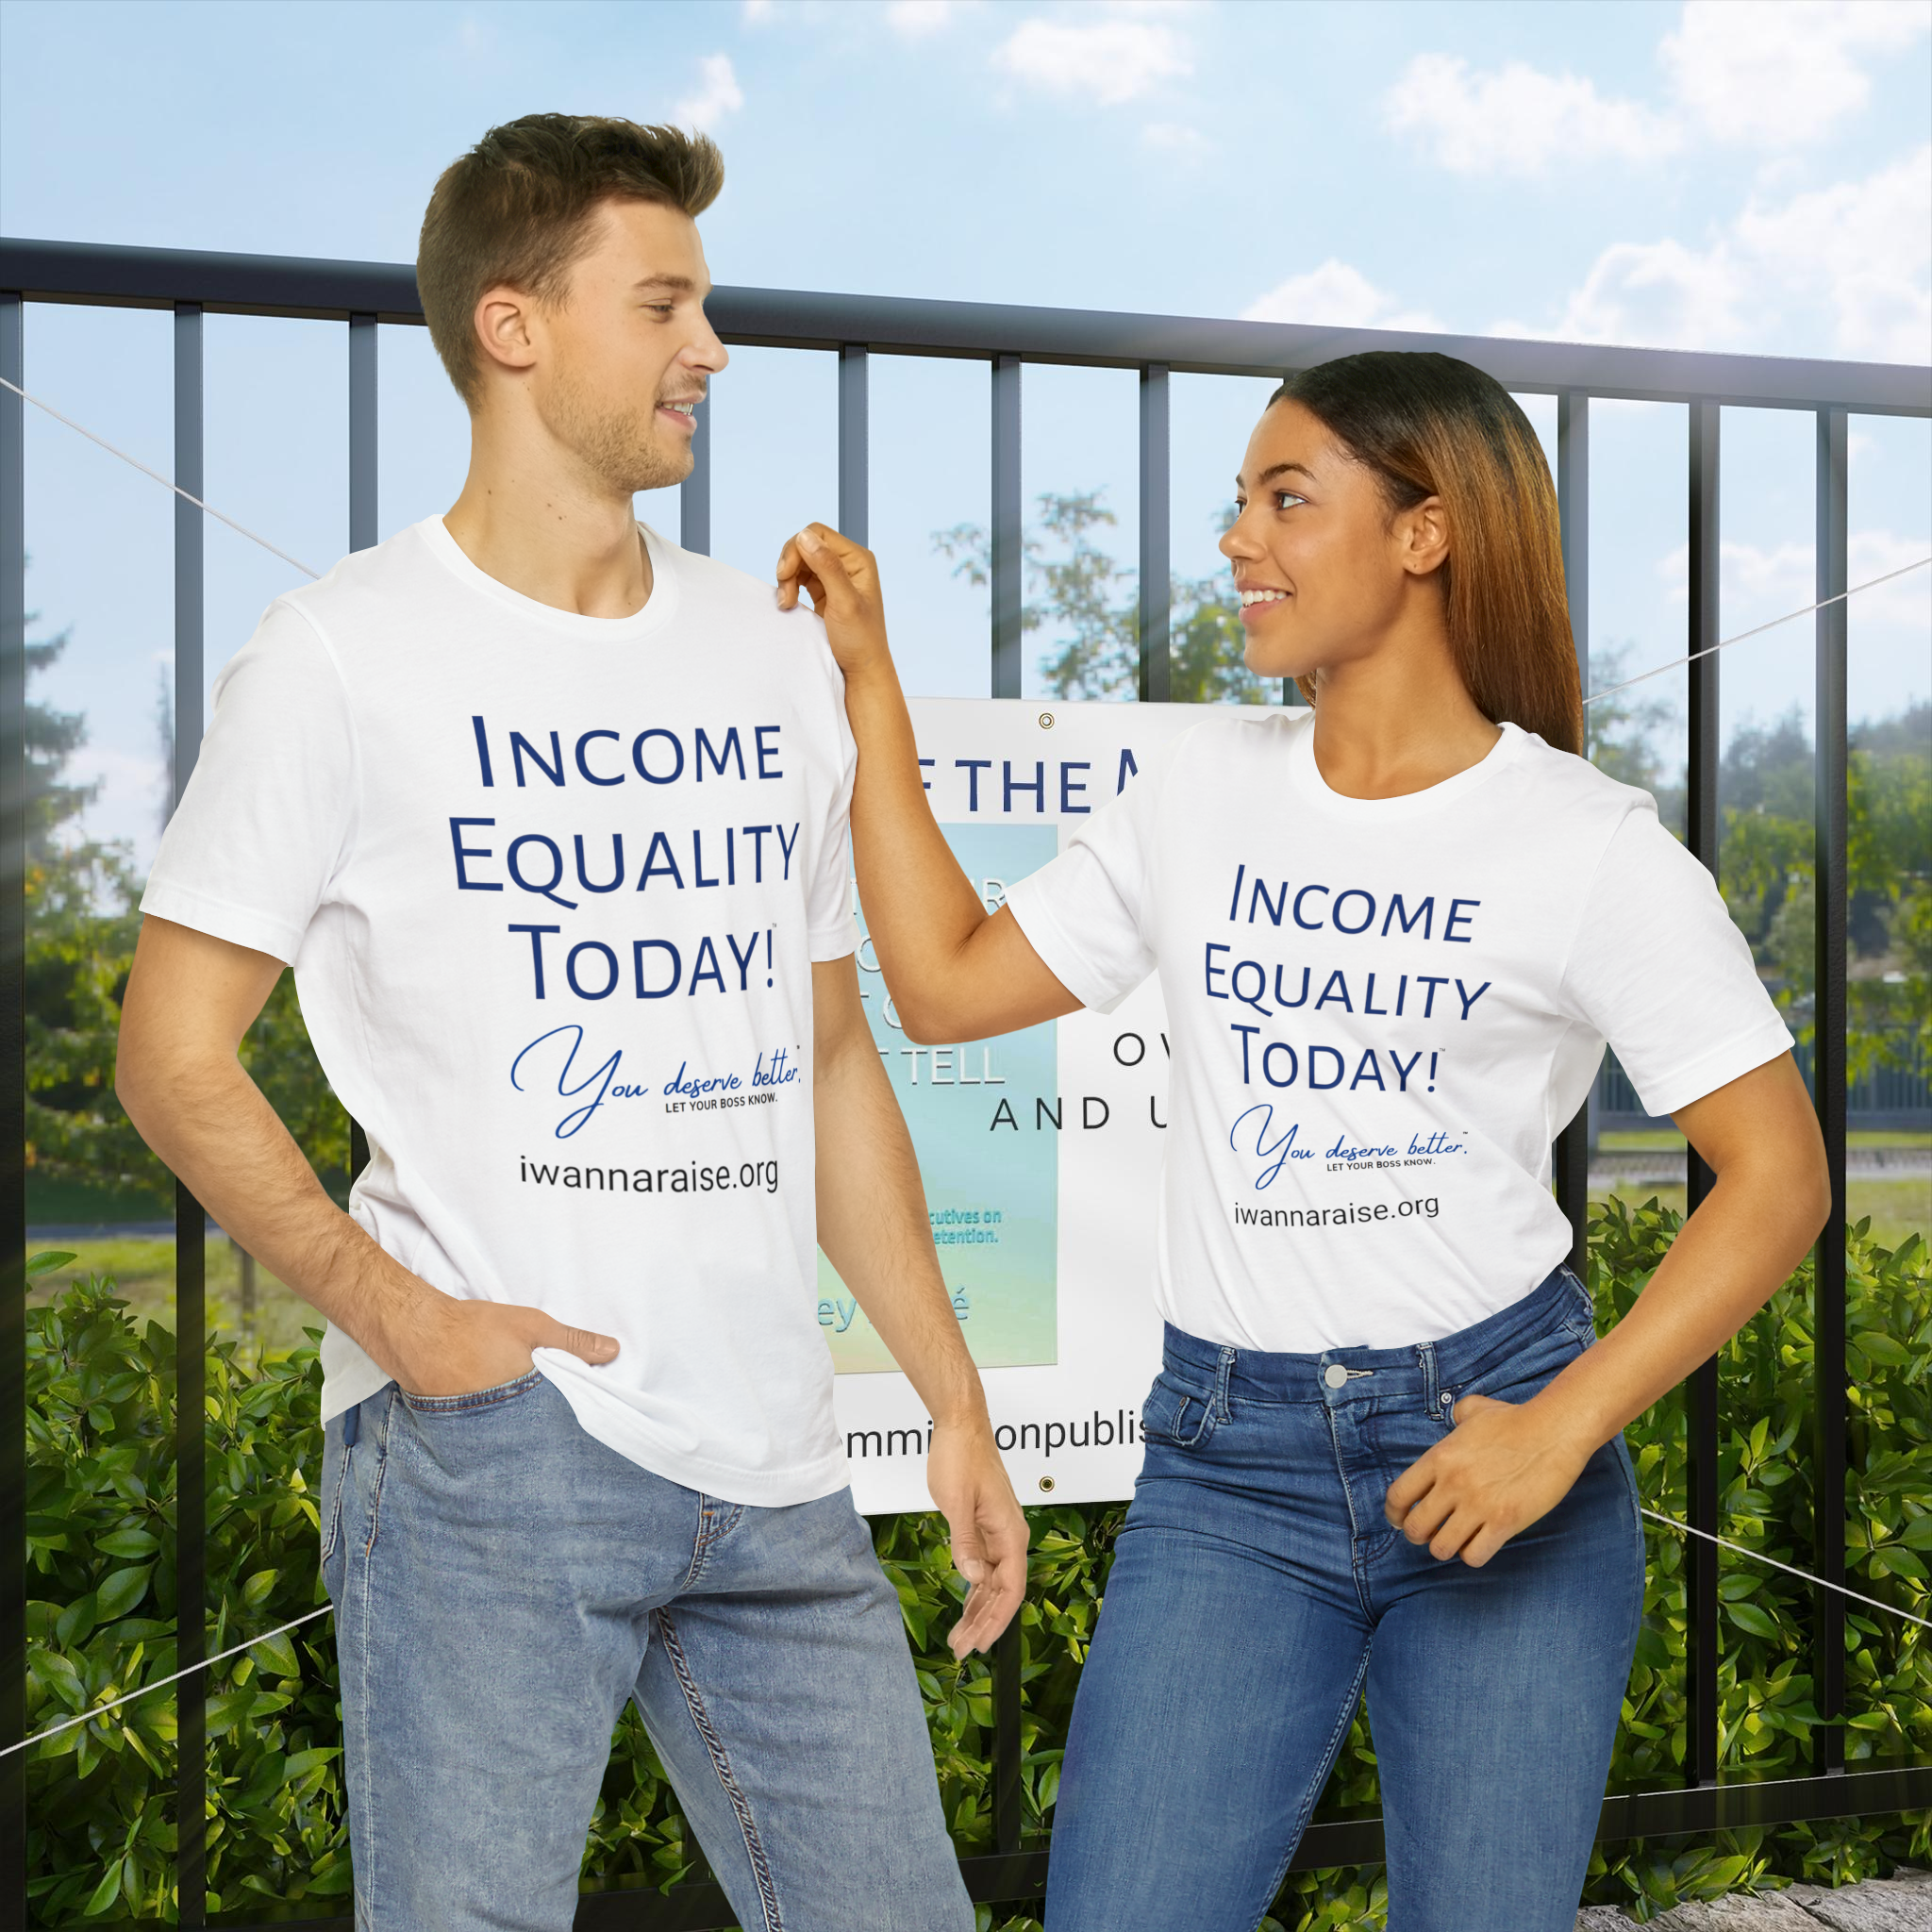 Addressing Economic Inequality, BUY YOUR T-SHIRT NOW: Income Equality Today! Be Part of the Movement, by No Commission Publishing, Ashley Moyé